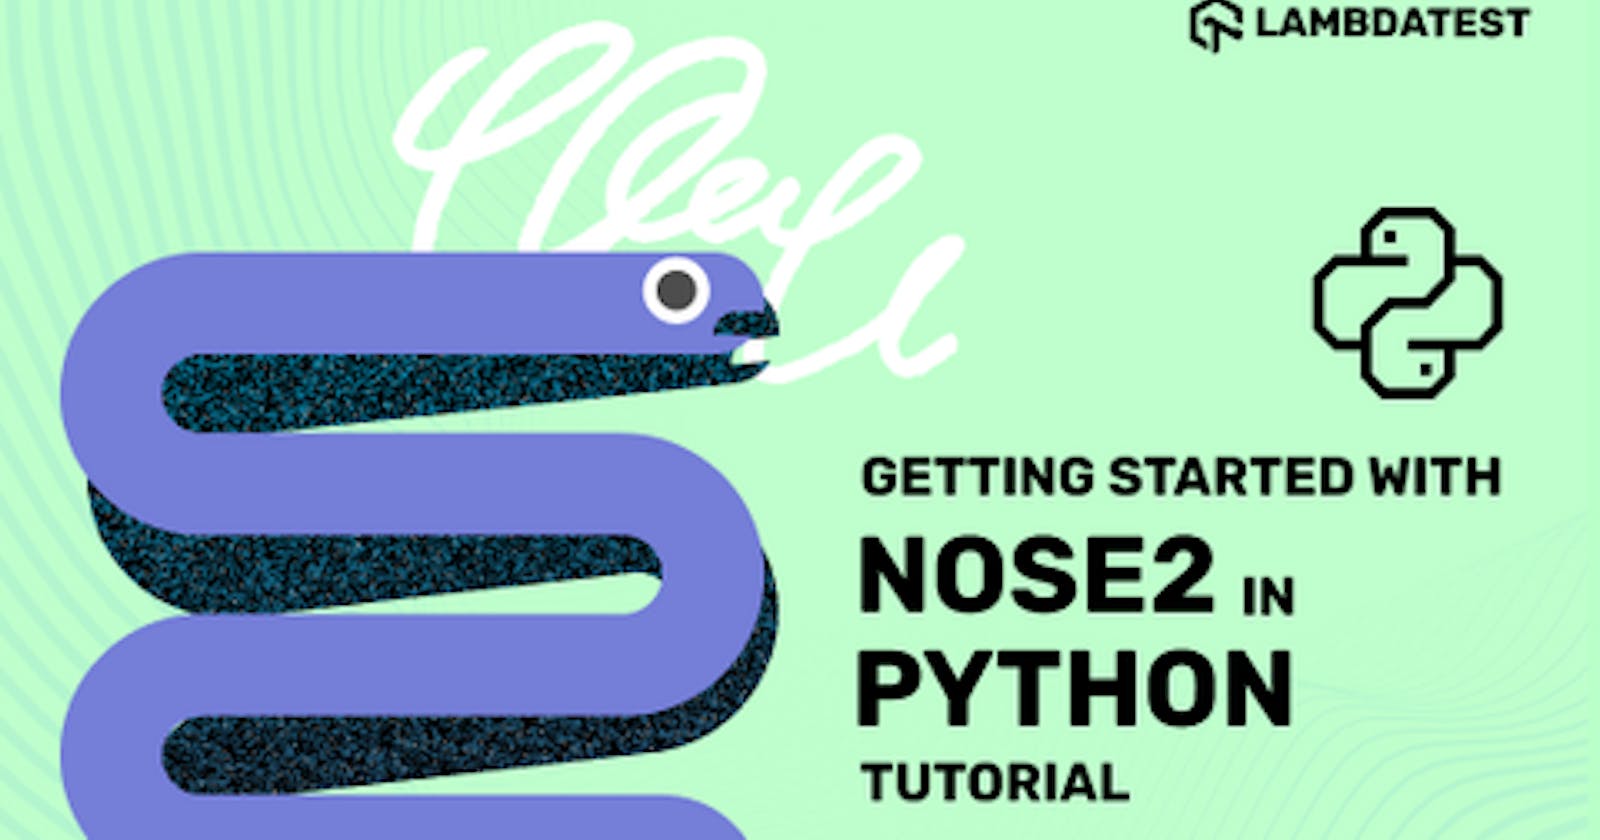 Getting Started With Nose2 in Python [Tutorial]